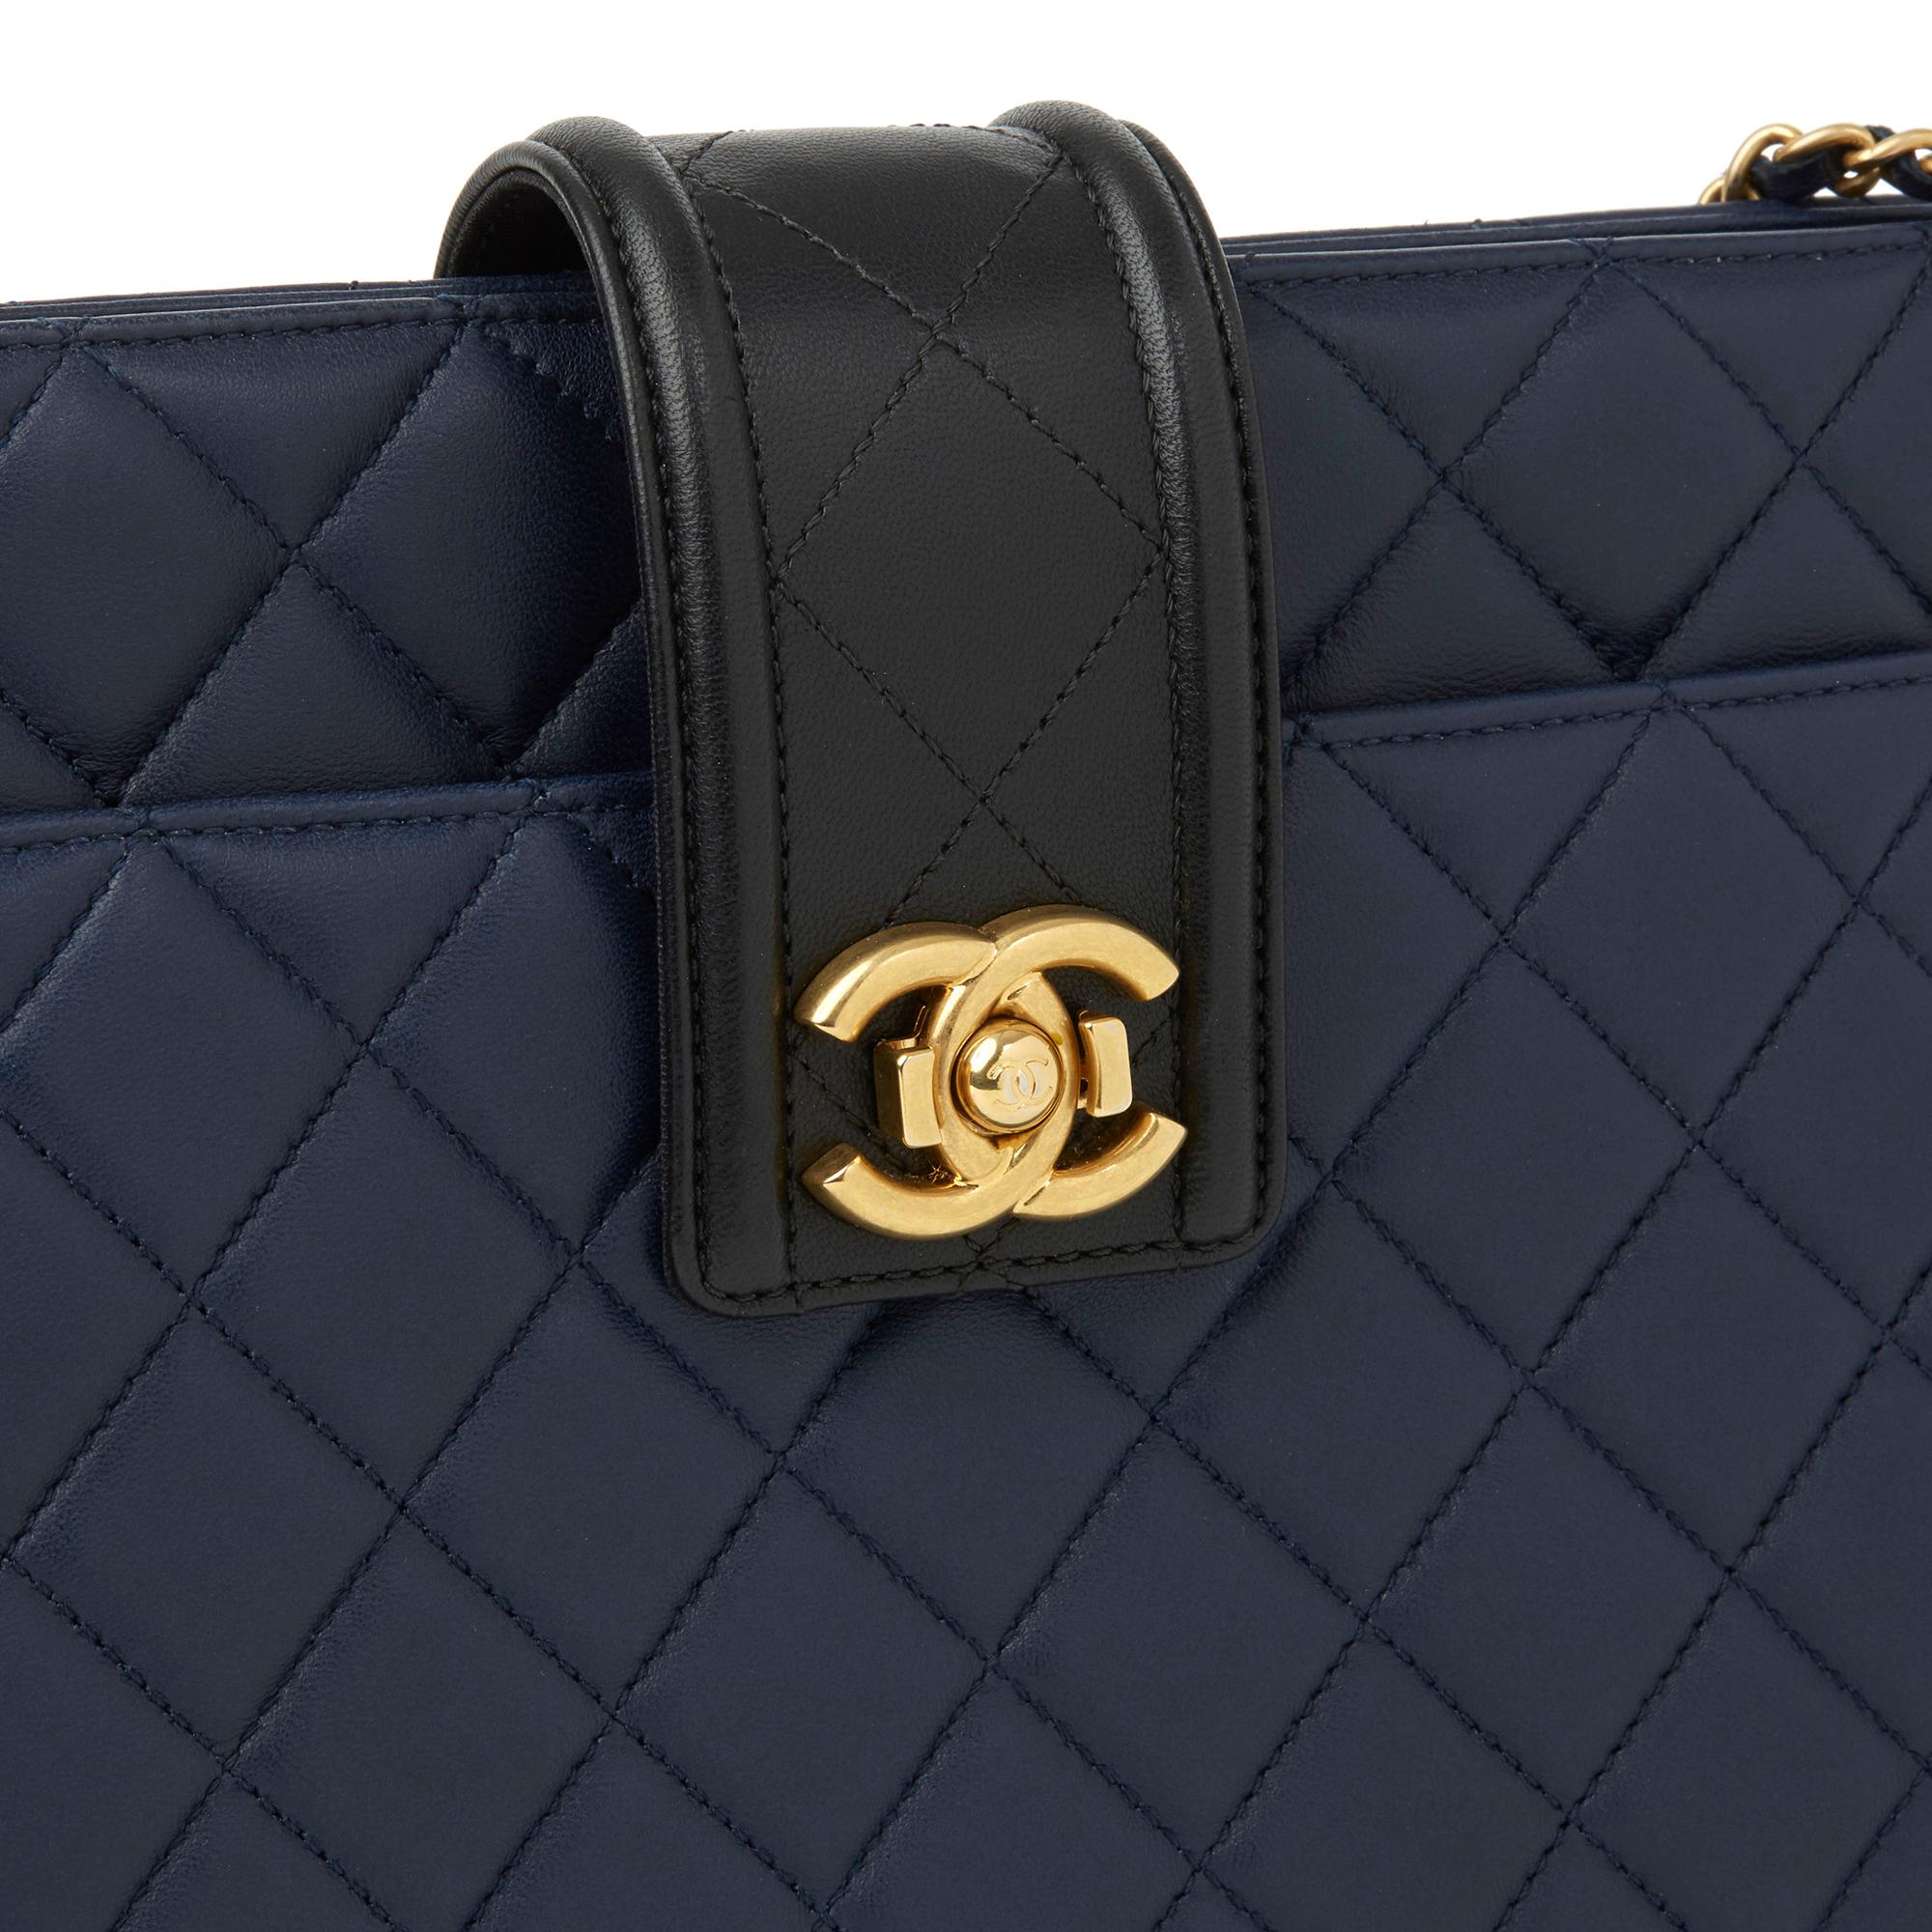 2015 Chanel Black & Navy Quilted Lambskin Large Shopping Tote 2